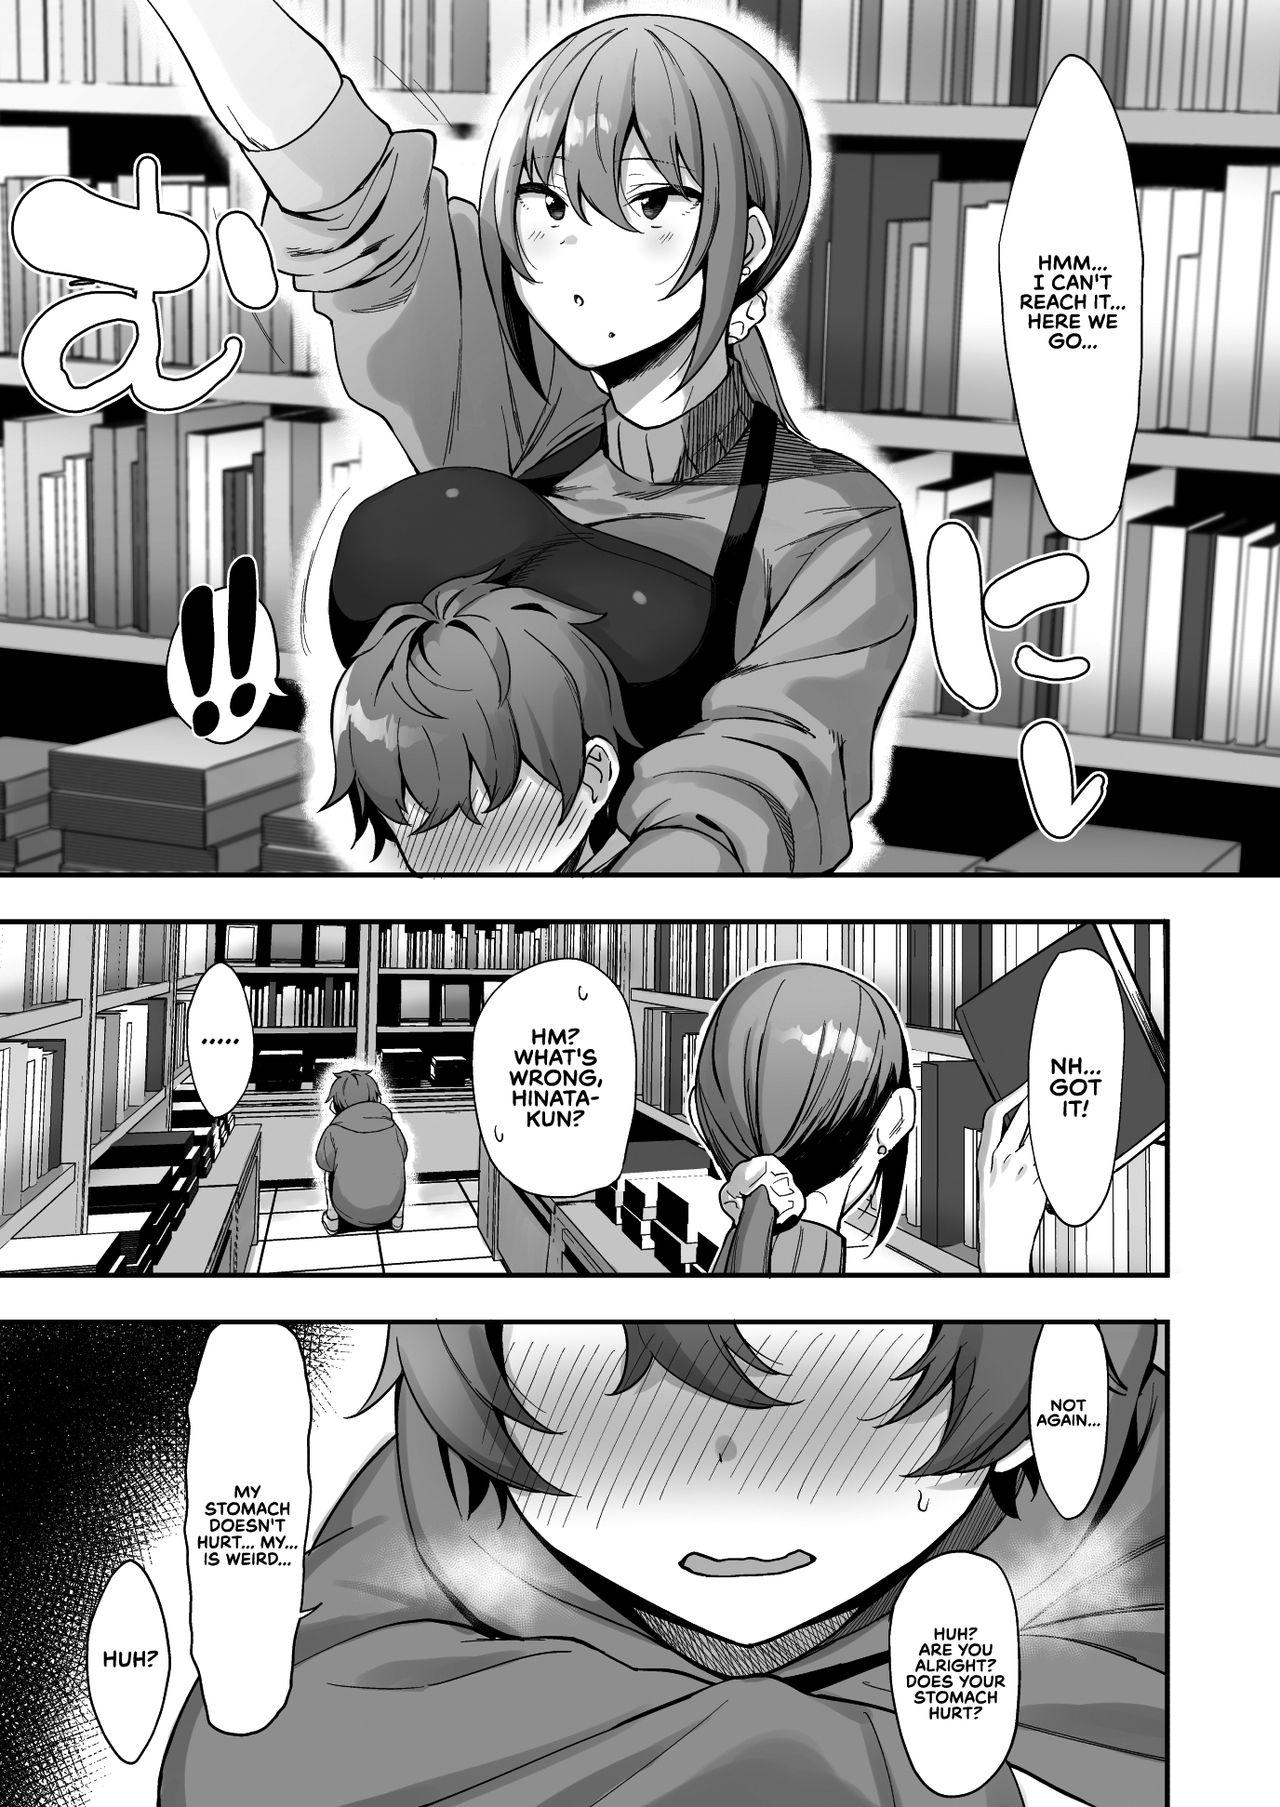 Price Furuhonya no Onee-san to | With The Lady From The Used Book Shop - Original Beard - Page 8